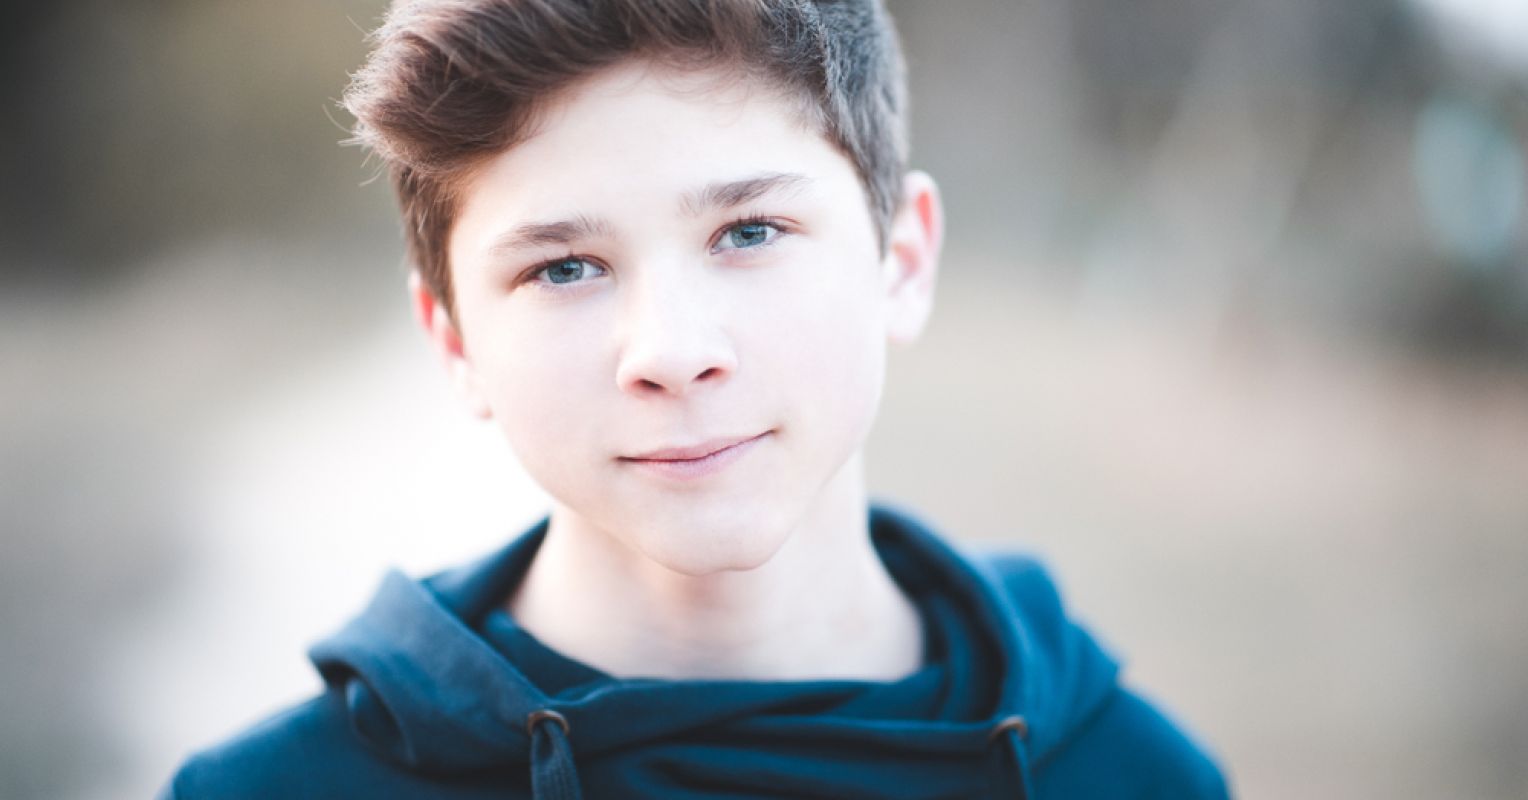 Small Teen - Why Many Young Boys Are Having Sex | Psychology Today